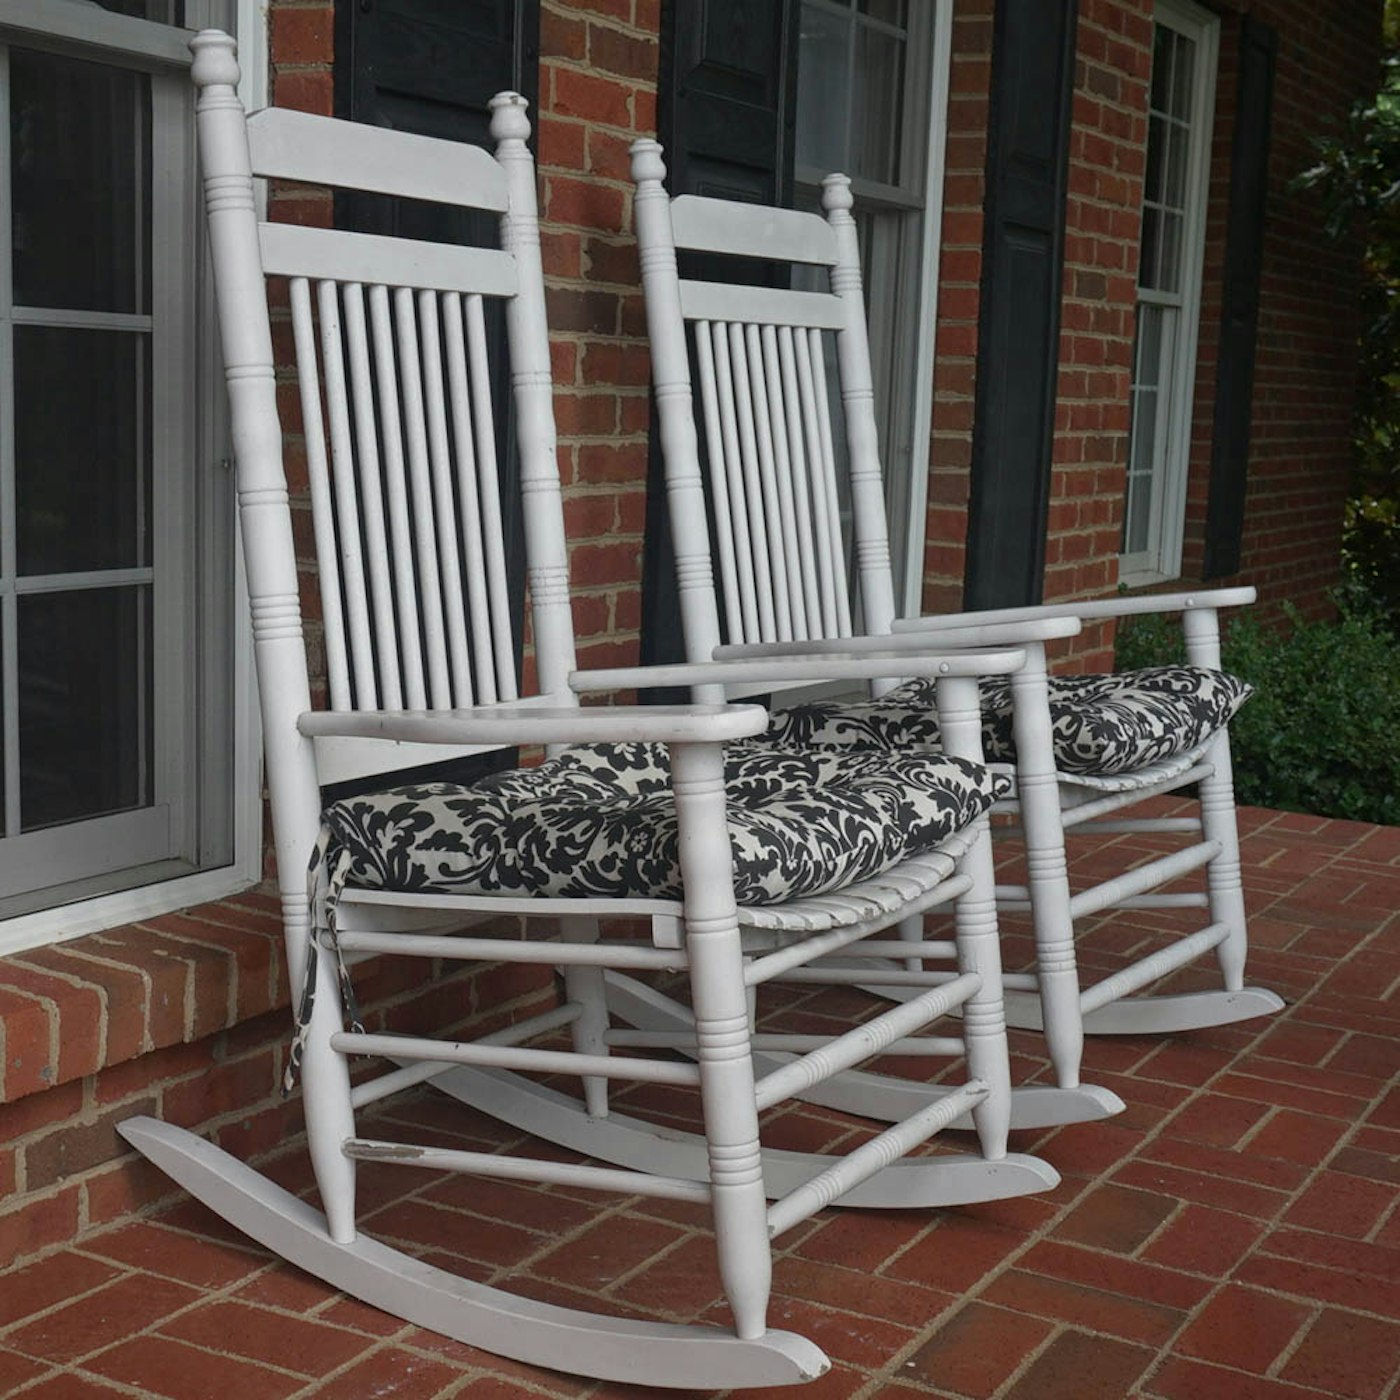 Pair of Outdoor Rocking Chairs by Cracker Barrel | EBTH